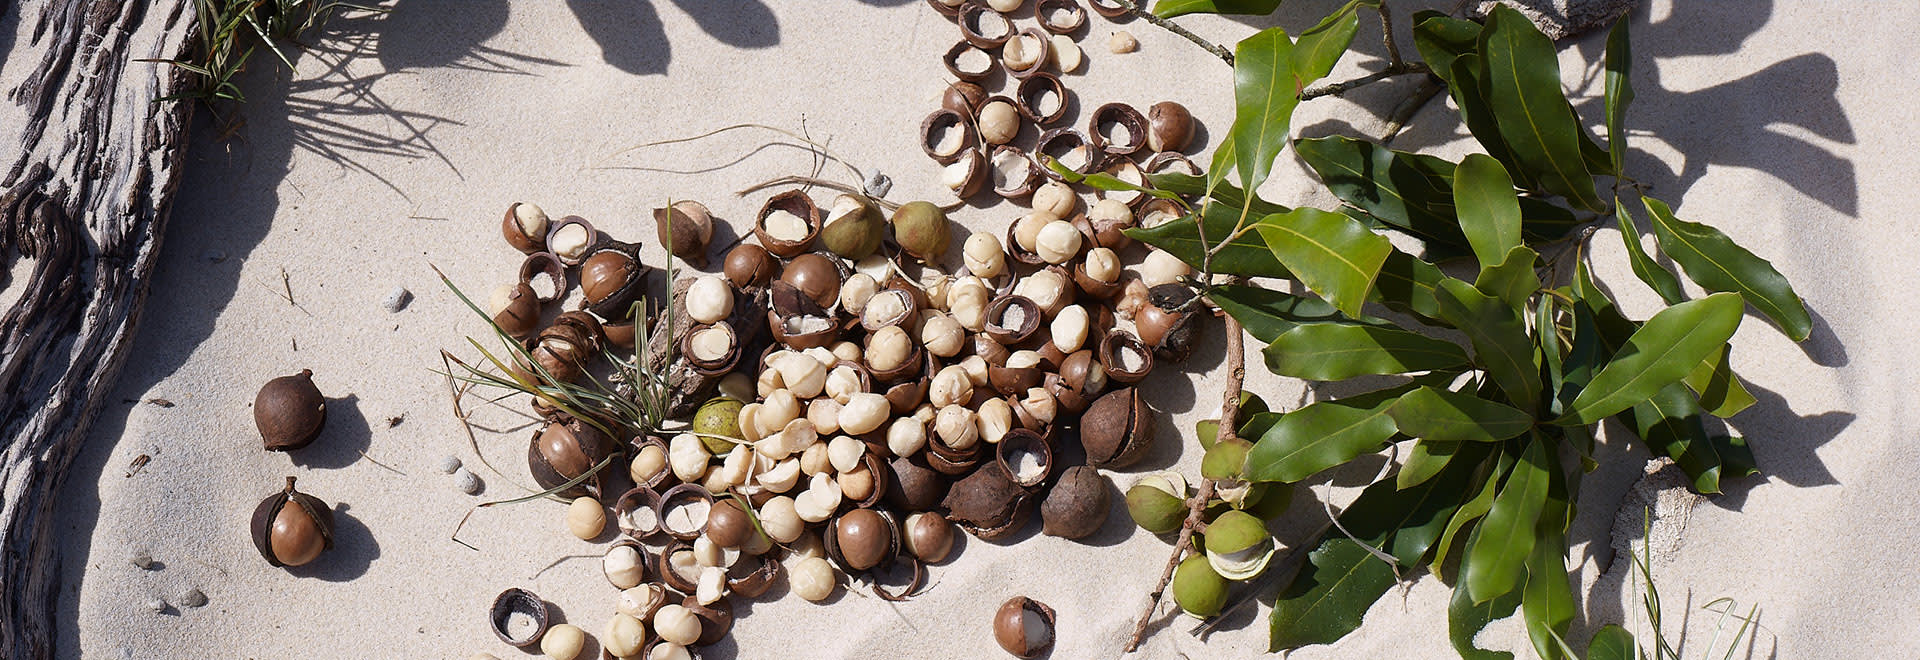 A photo of macadamia nuts in the sand